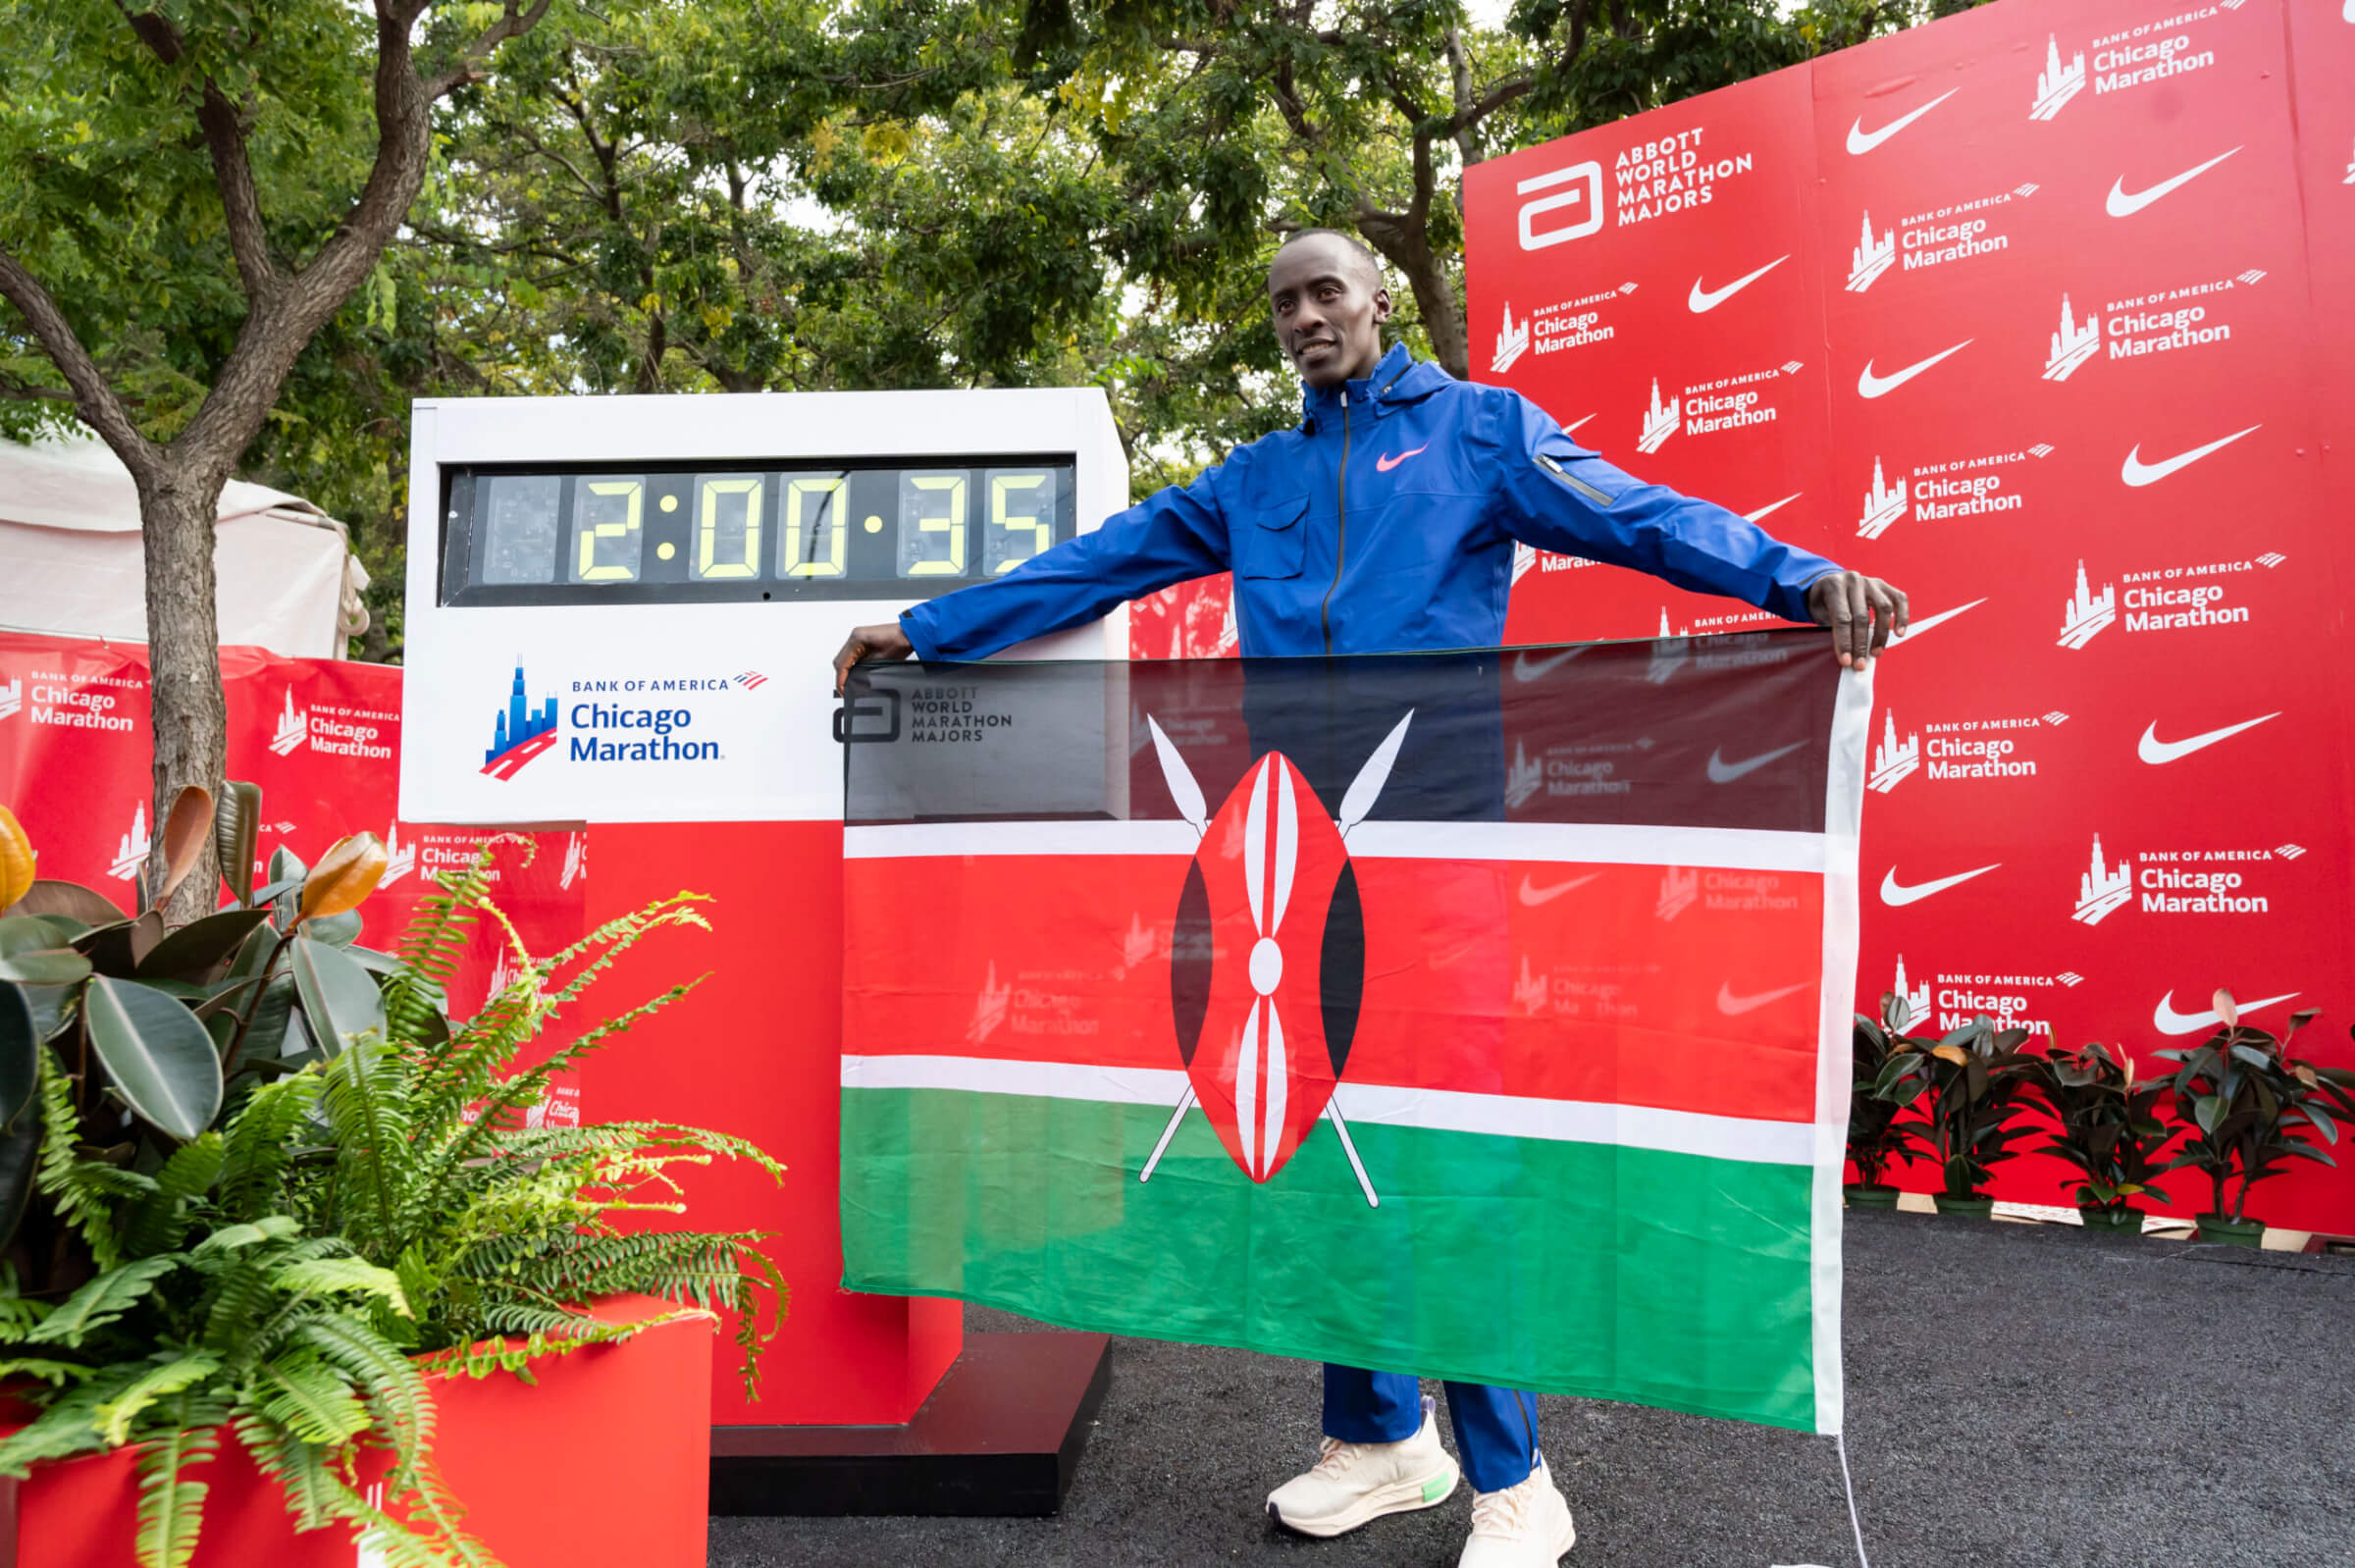 Oct 8, 2023; Chicago, IL, USA; Kelvin Kiptum (KEN) celebrates after finishing in a world record time of 2:00:35 to win the Chicago Marathon at Grant Park. Mandatory Credit: Patrick Gorski-USA TODAY Sports